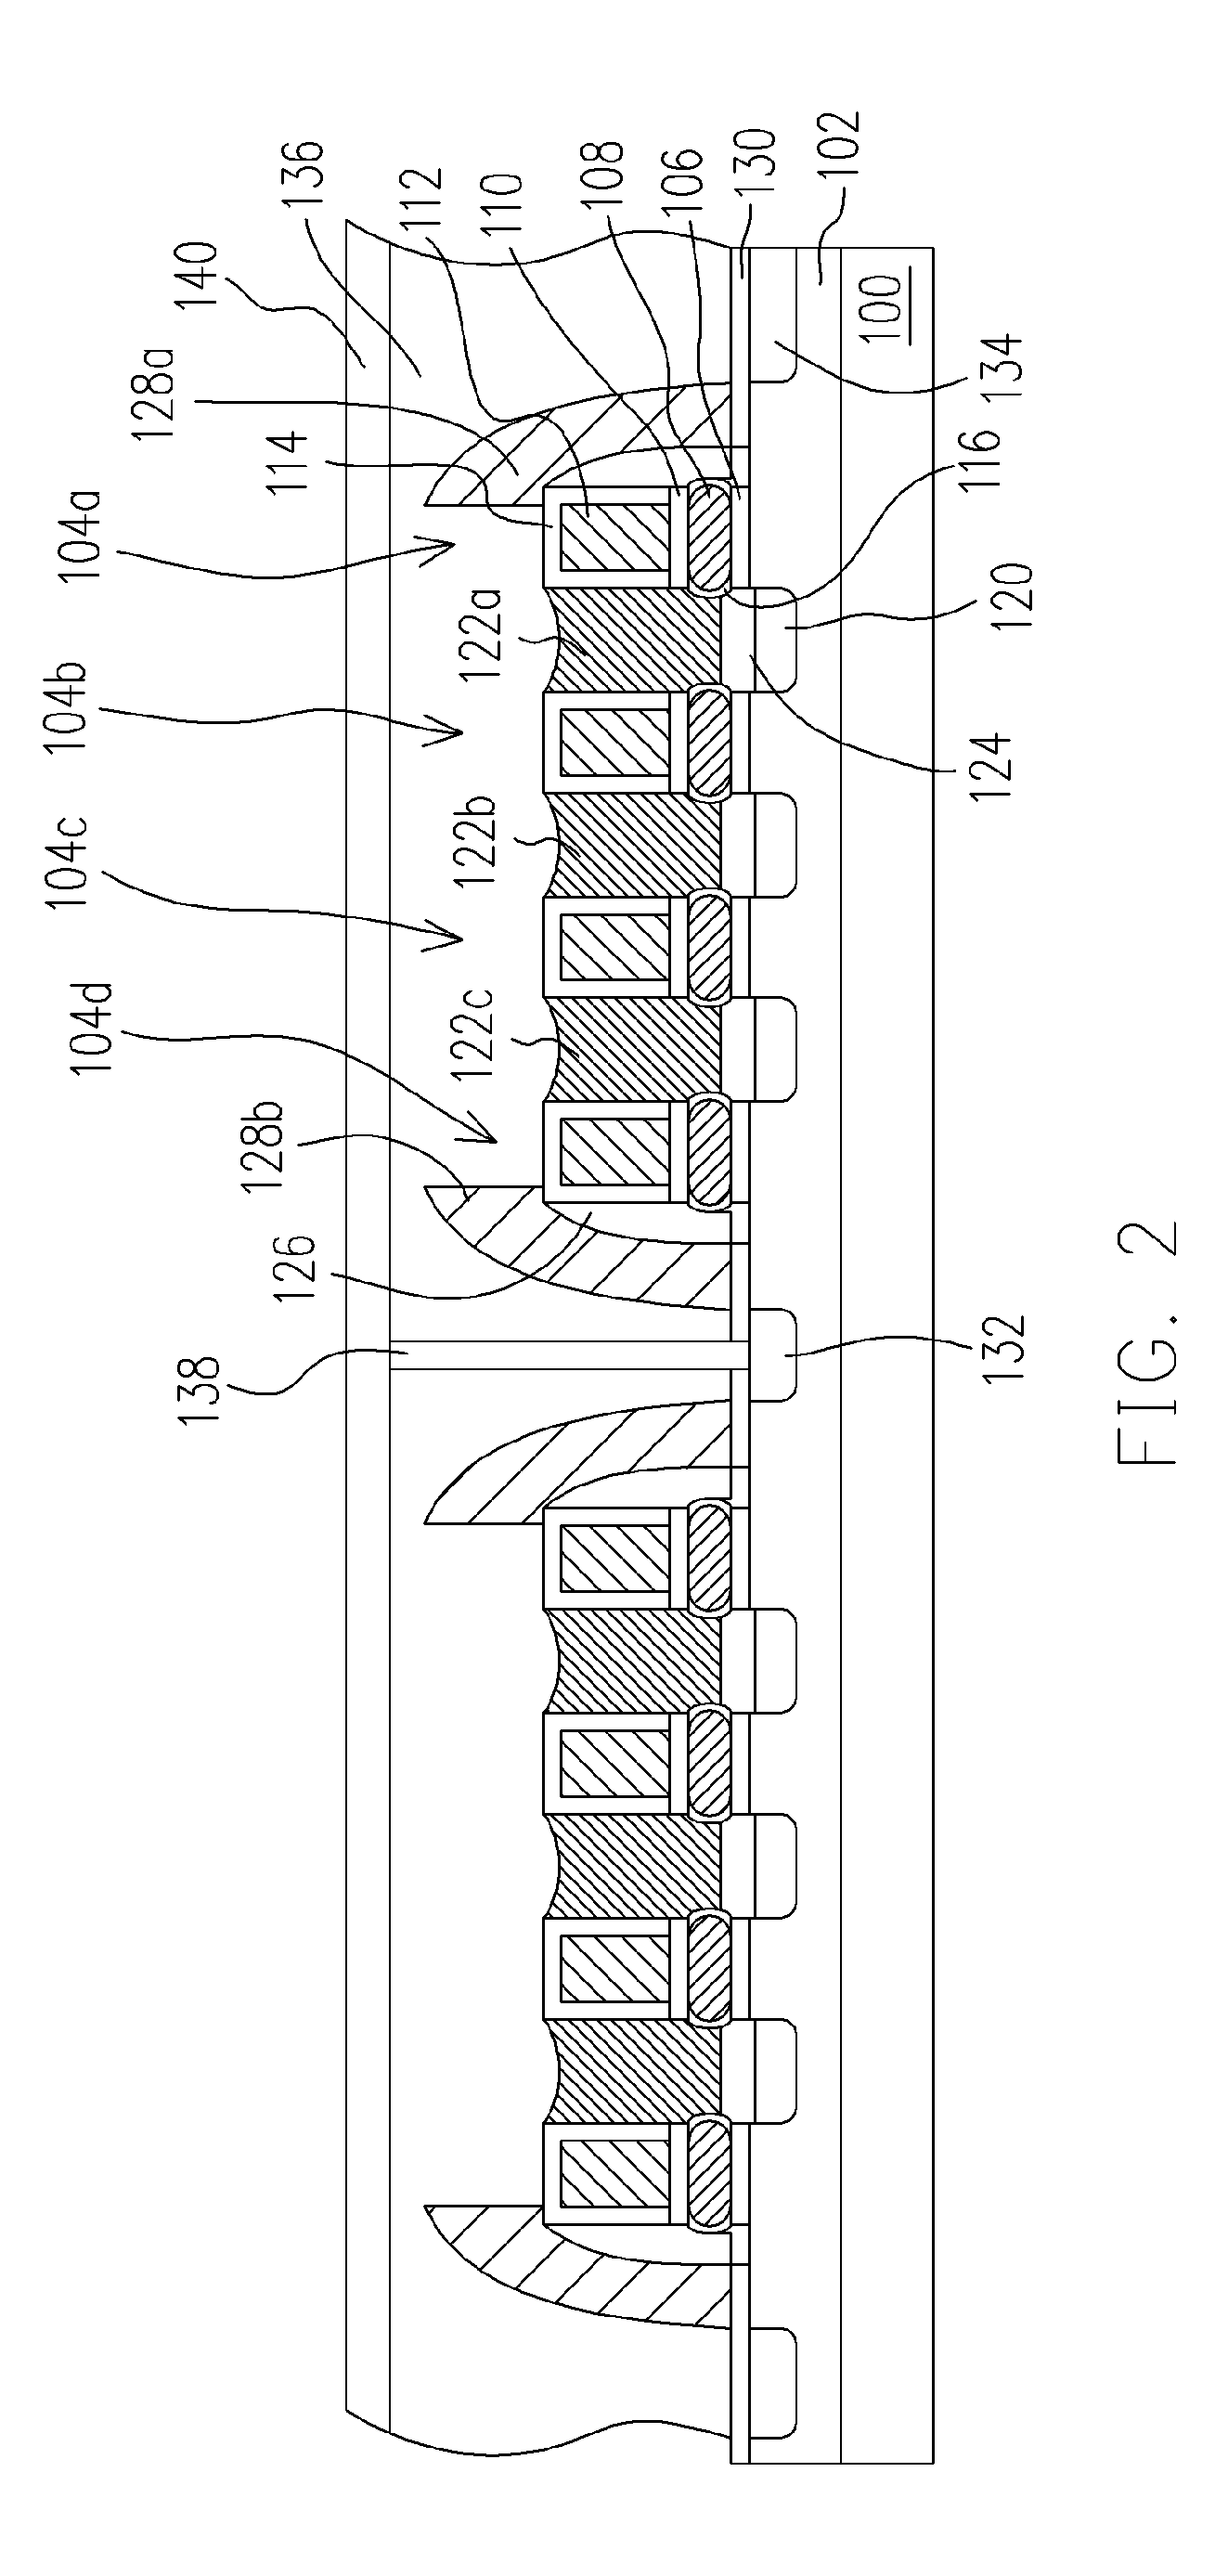 [NAND flash memory cell row, NAND flash memory cell array, operation and fabrication method thereof]